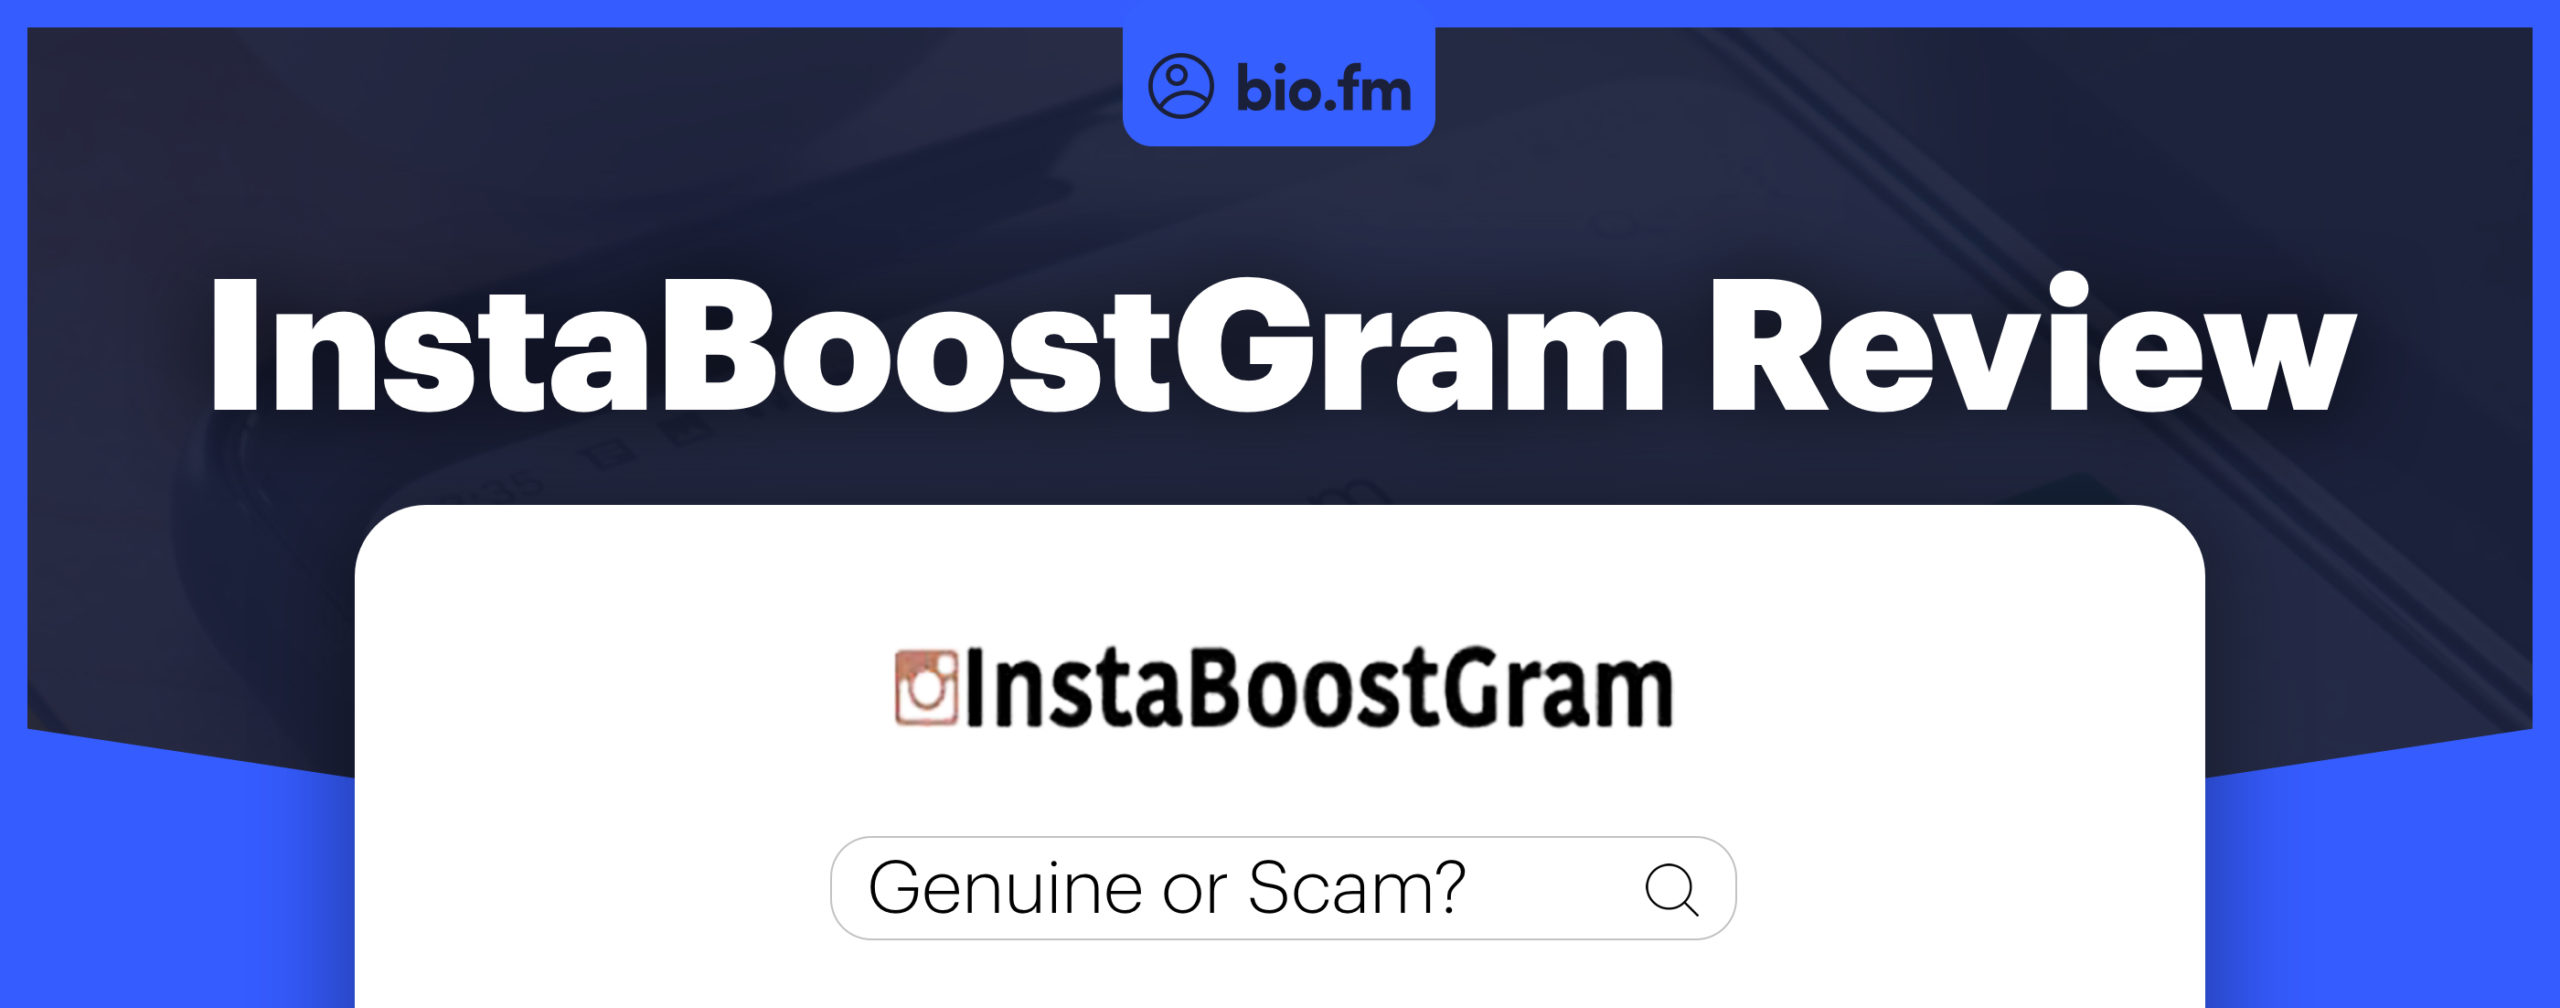 instaboostgram review featured image